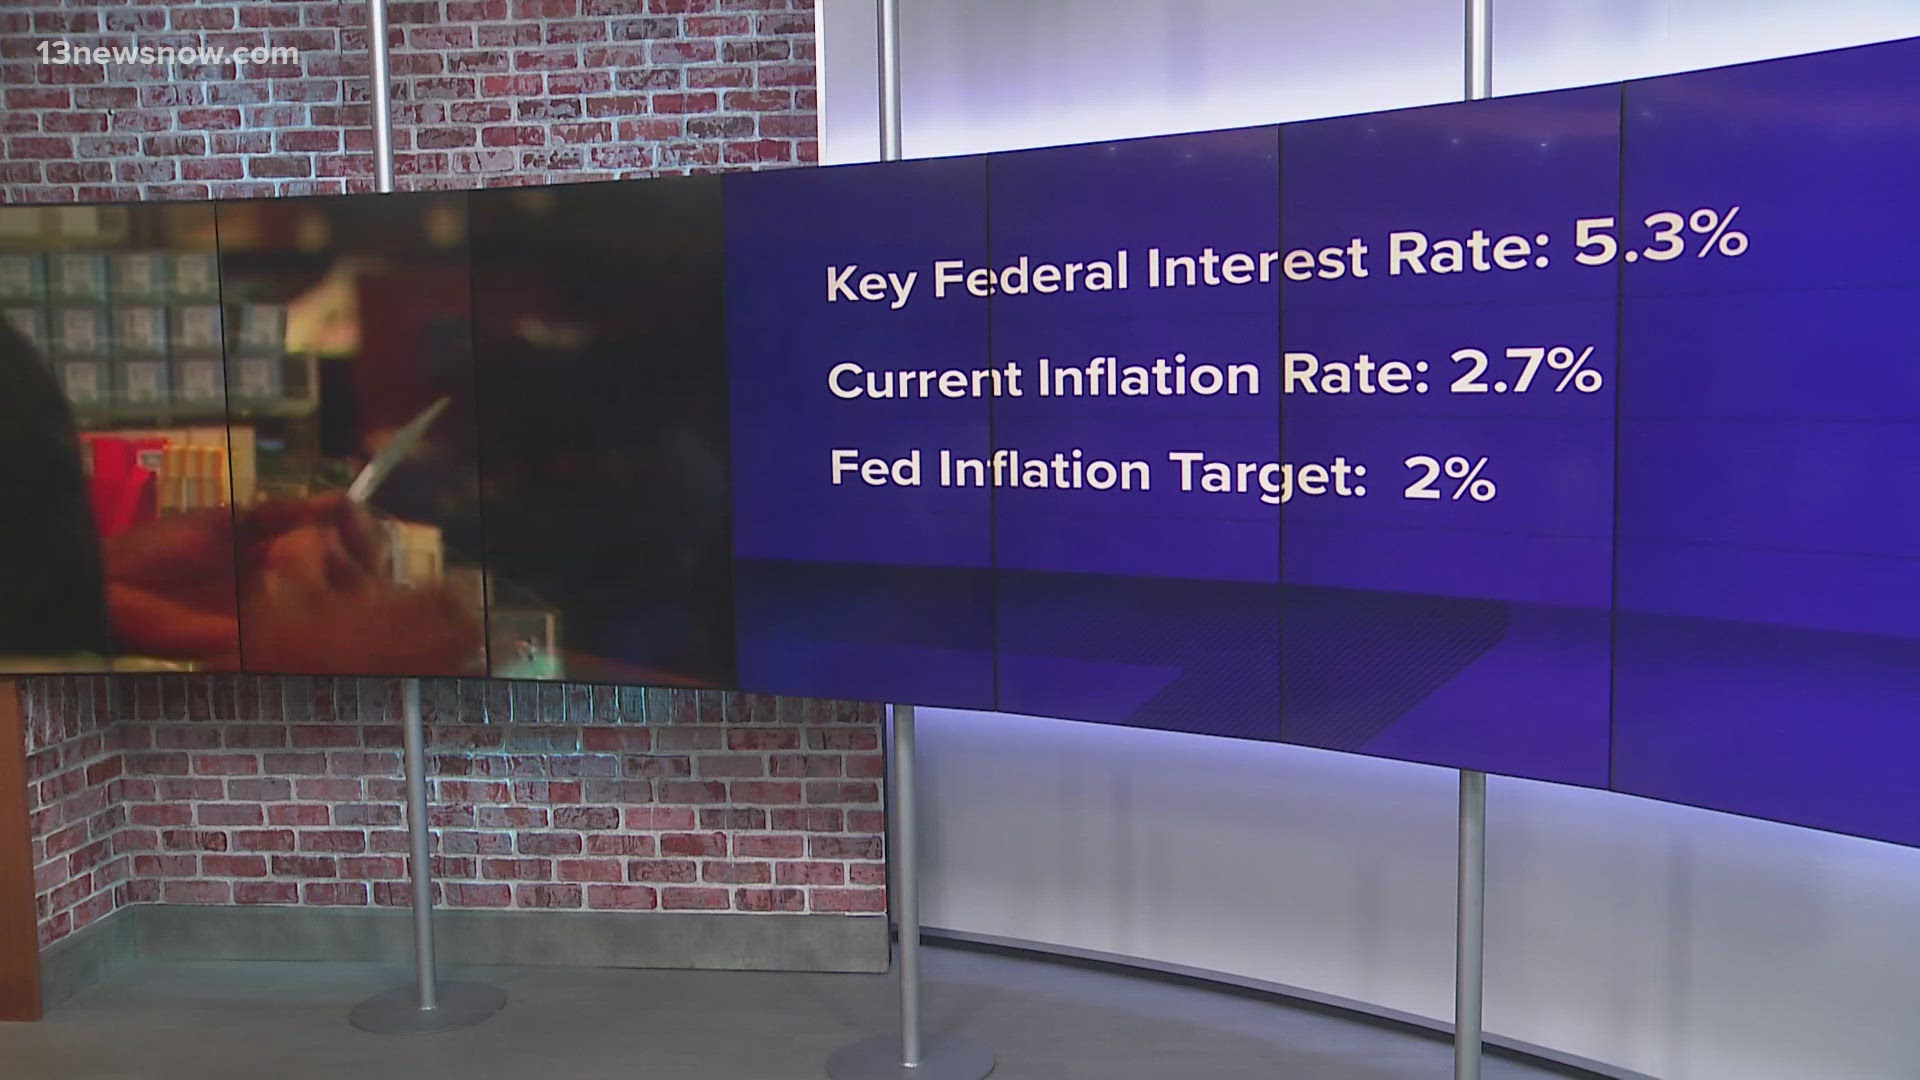 The Federal Reserve said today stubborn inflation numbers are keeping them from bringing the key rate down.